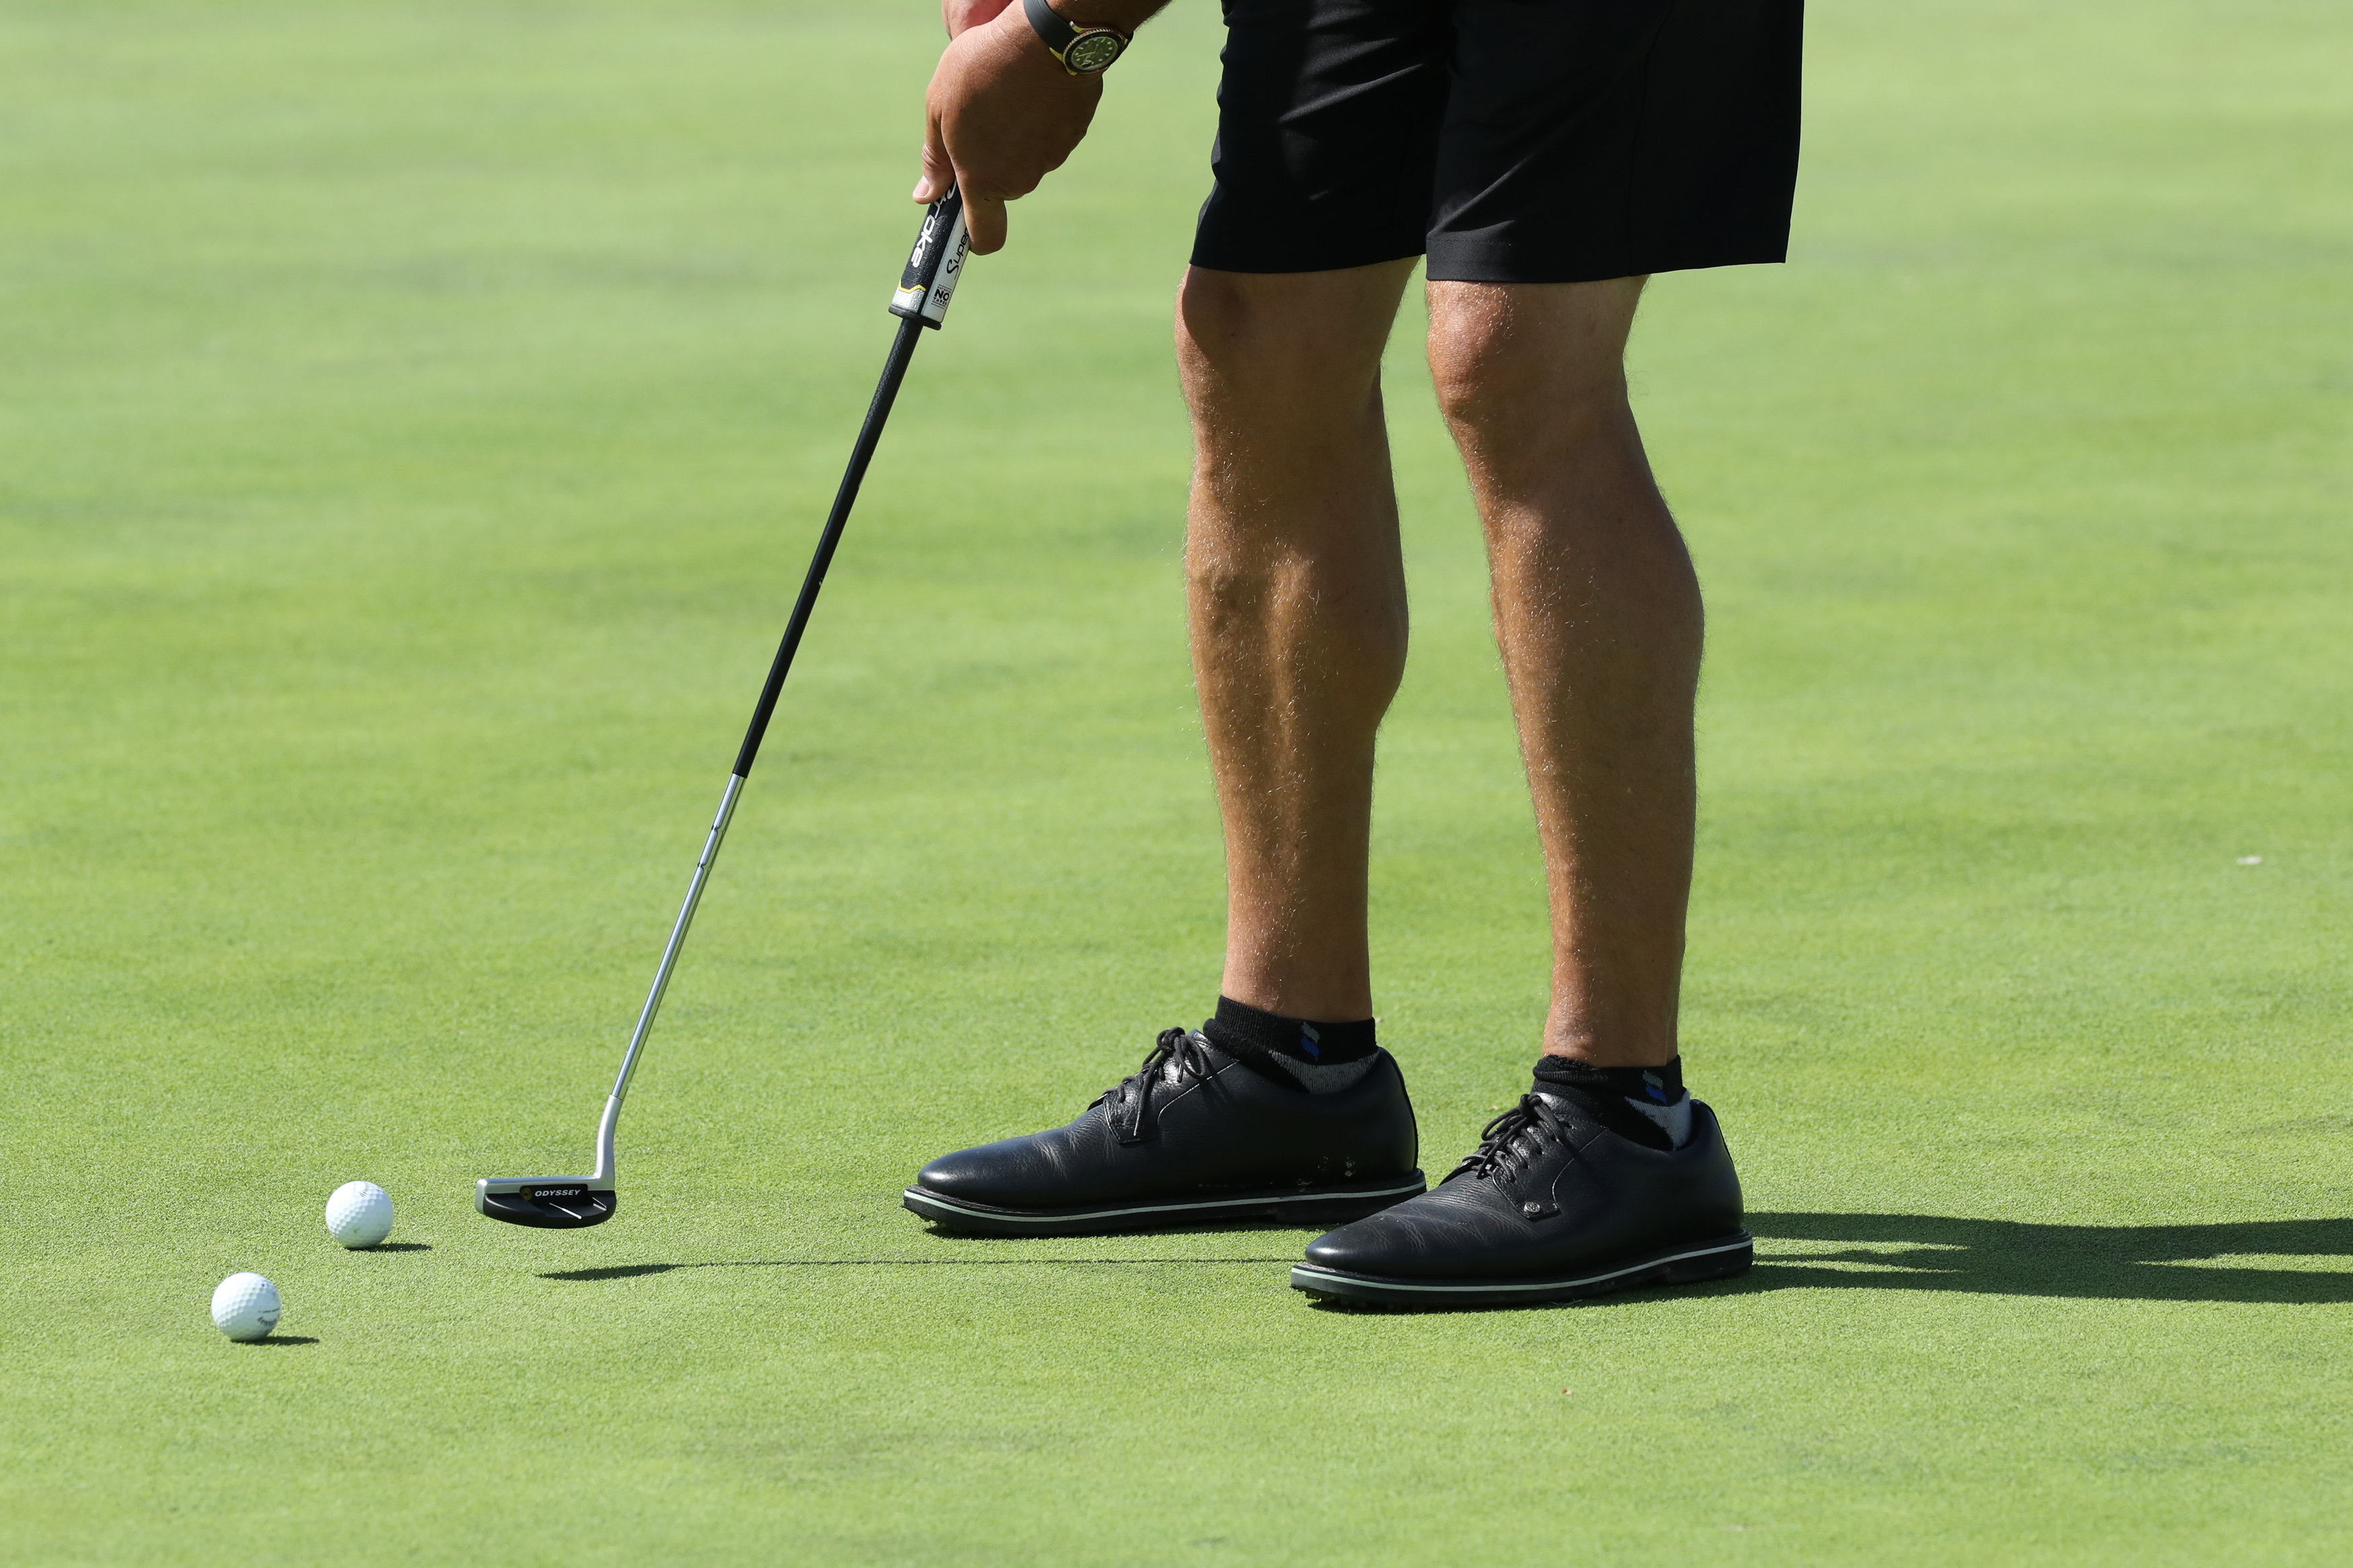 shoes to wear golfing